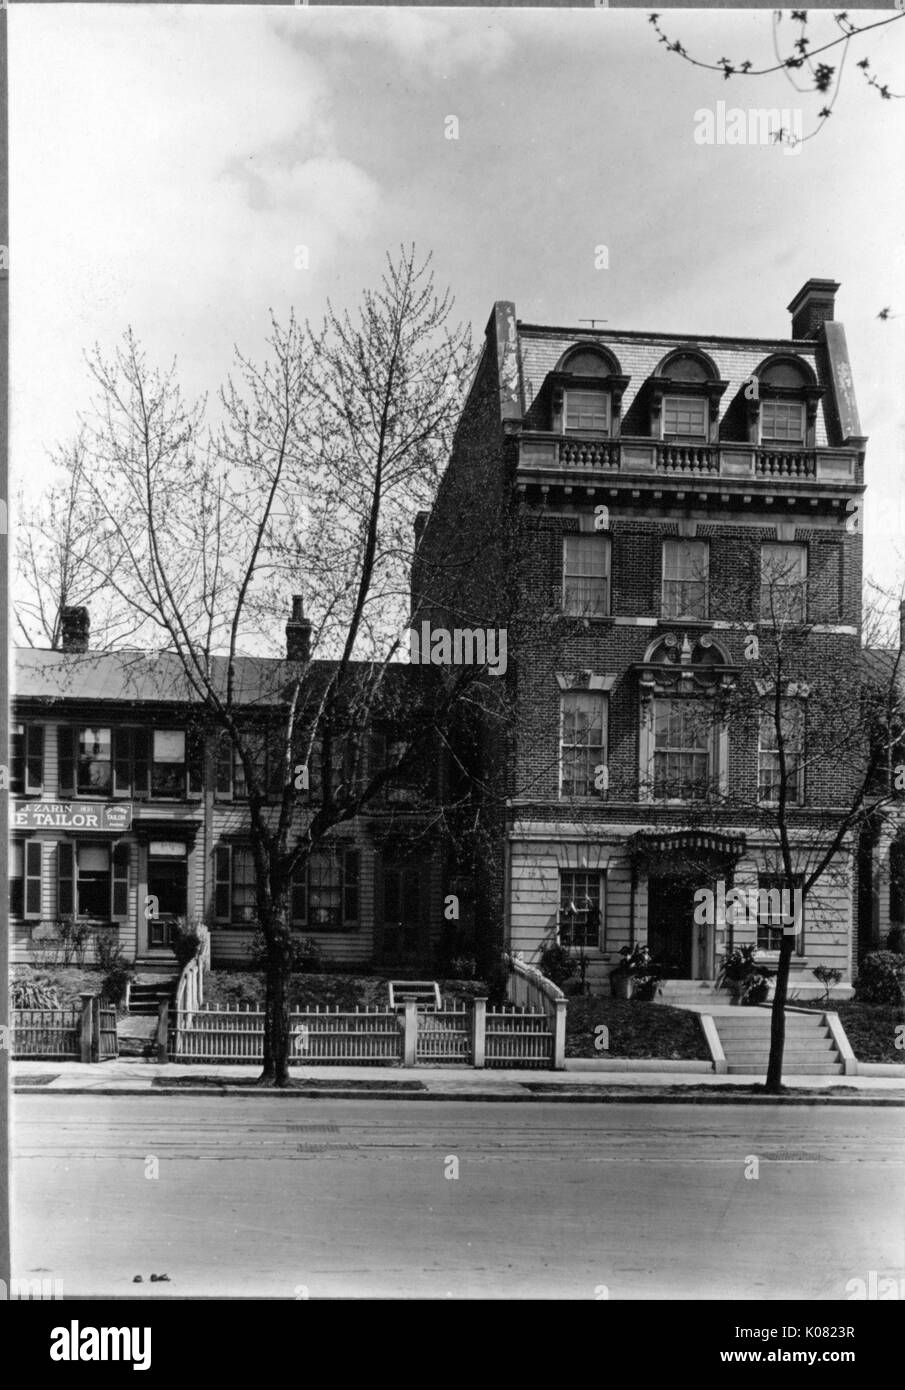 Two buildings sit on a street wit a tree-lined sidewalk in Baltimore, Maryland, one (left) with the sign for a tailor, shrubbery, a short fence, shuttered windows, and chimneys; the other (right) brick, with a small staircase leading to the entryway, shrubbery, a chimney, top-story dormer windows, and ornate stone accents, Baltimore, Maryland, 1910. This image is from a series documenting the construction and sale of homes in the Roland Park/Guilford neighborhood of Baltimore, a streetcar suburb and one of the first planned communities in the United States. Stock Photo